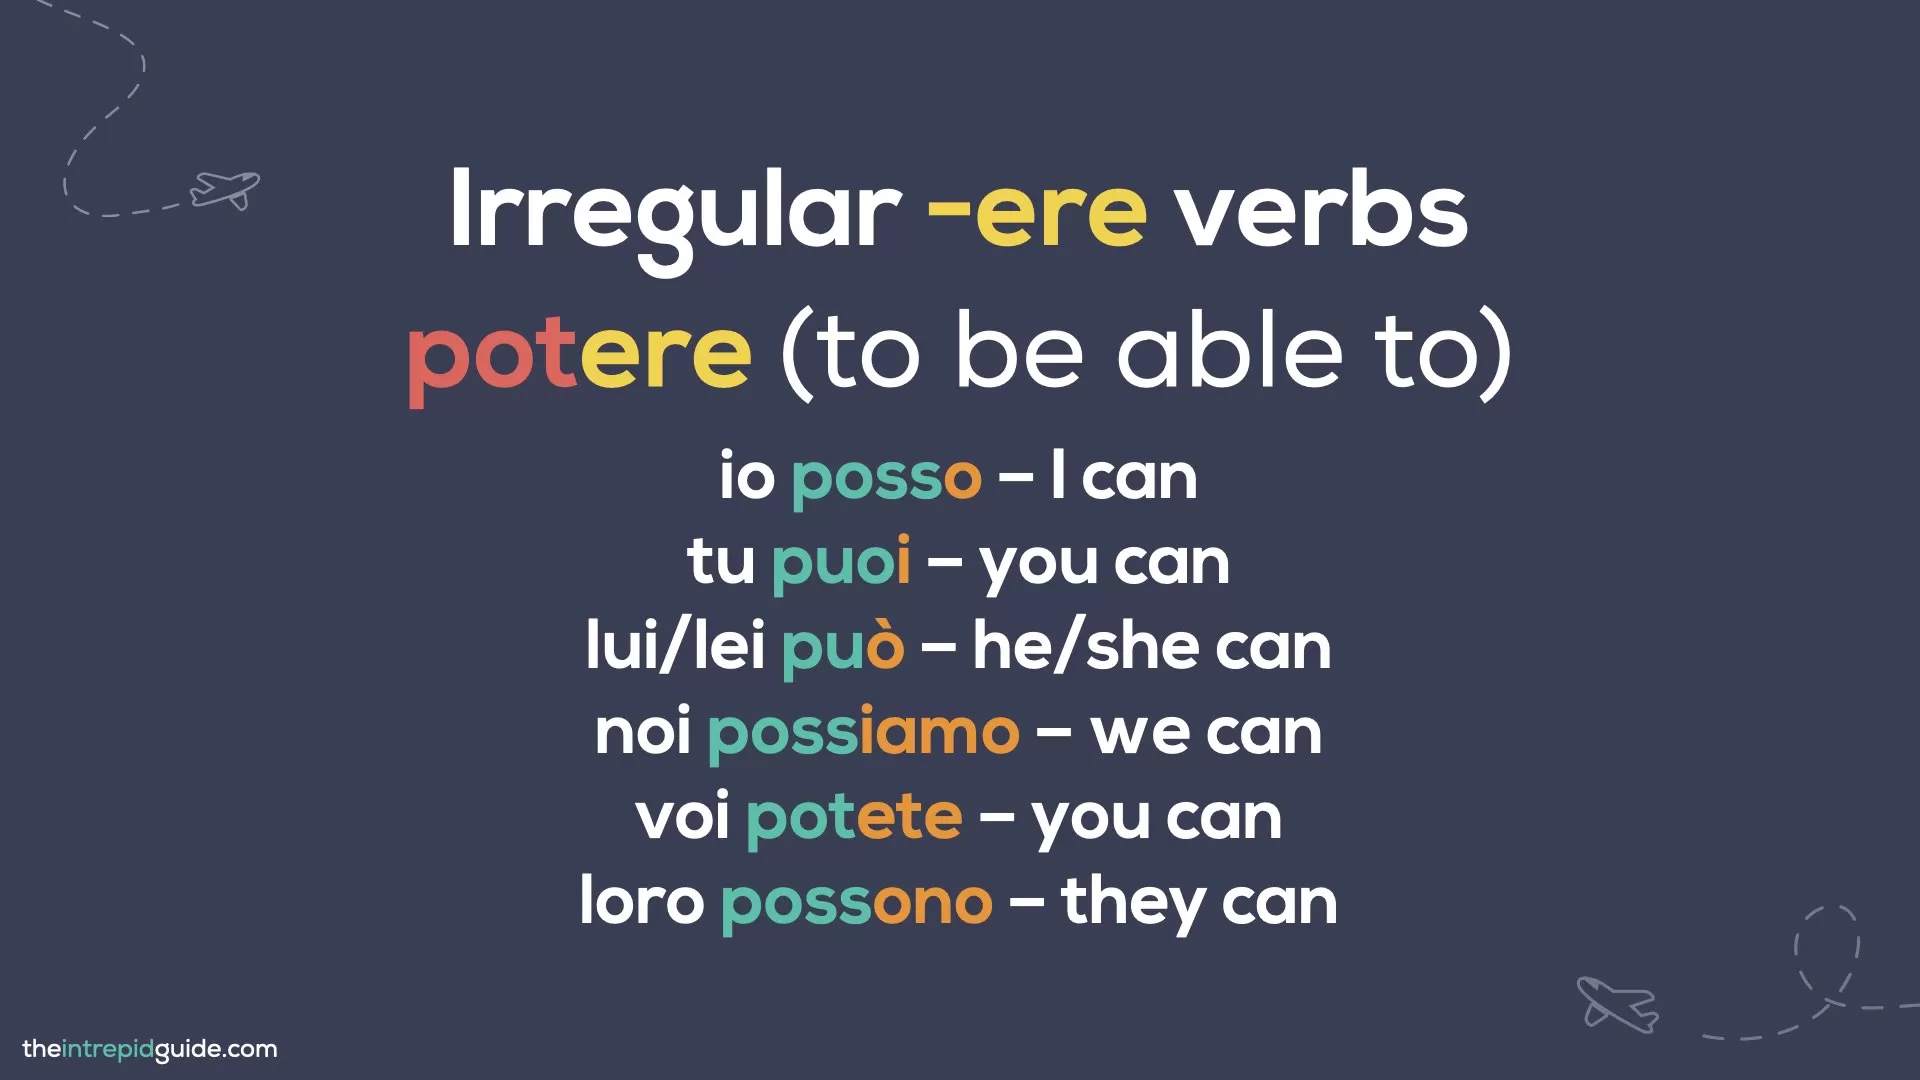 How to Conjugate Italian Verbs - Conjugating the verb potere - to be able to, can